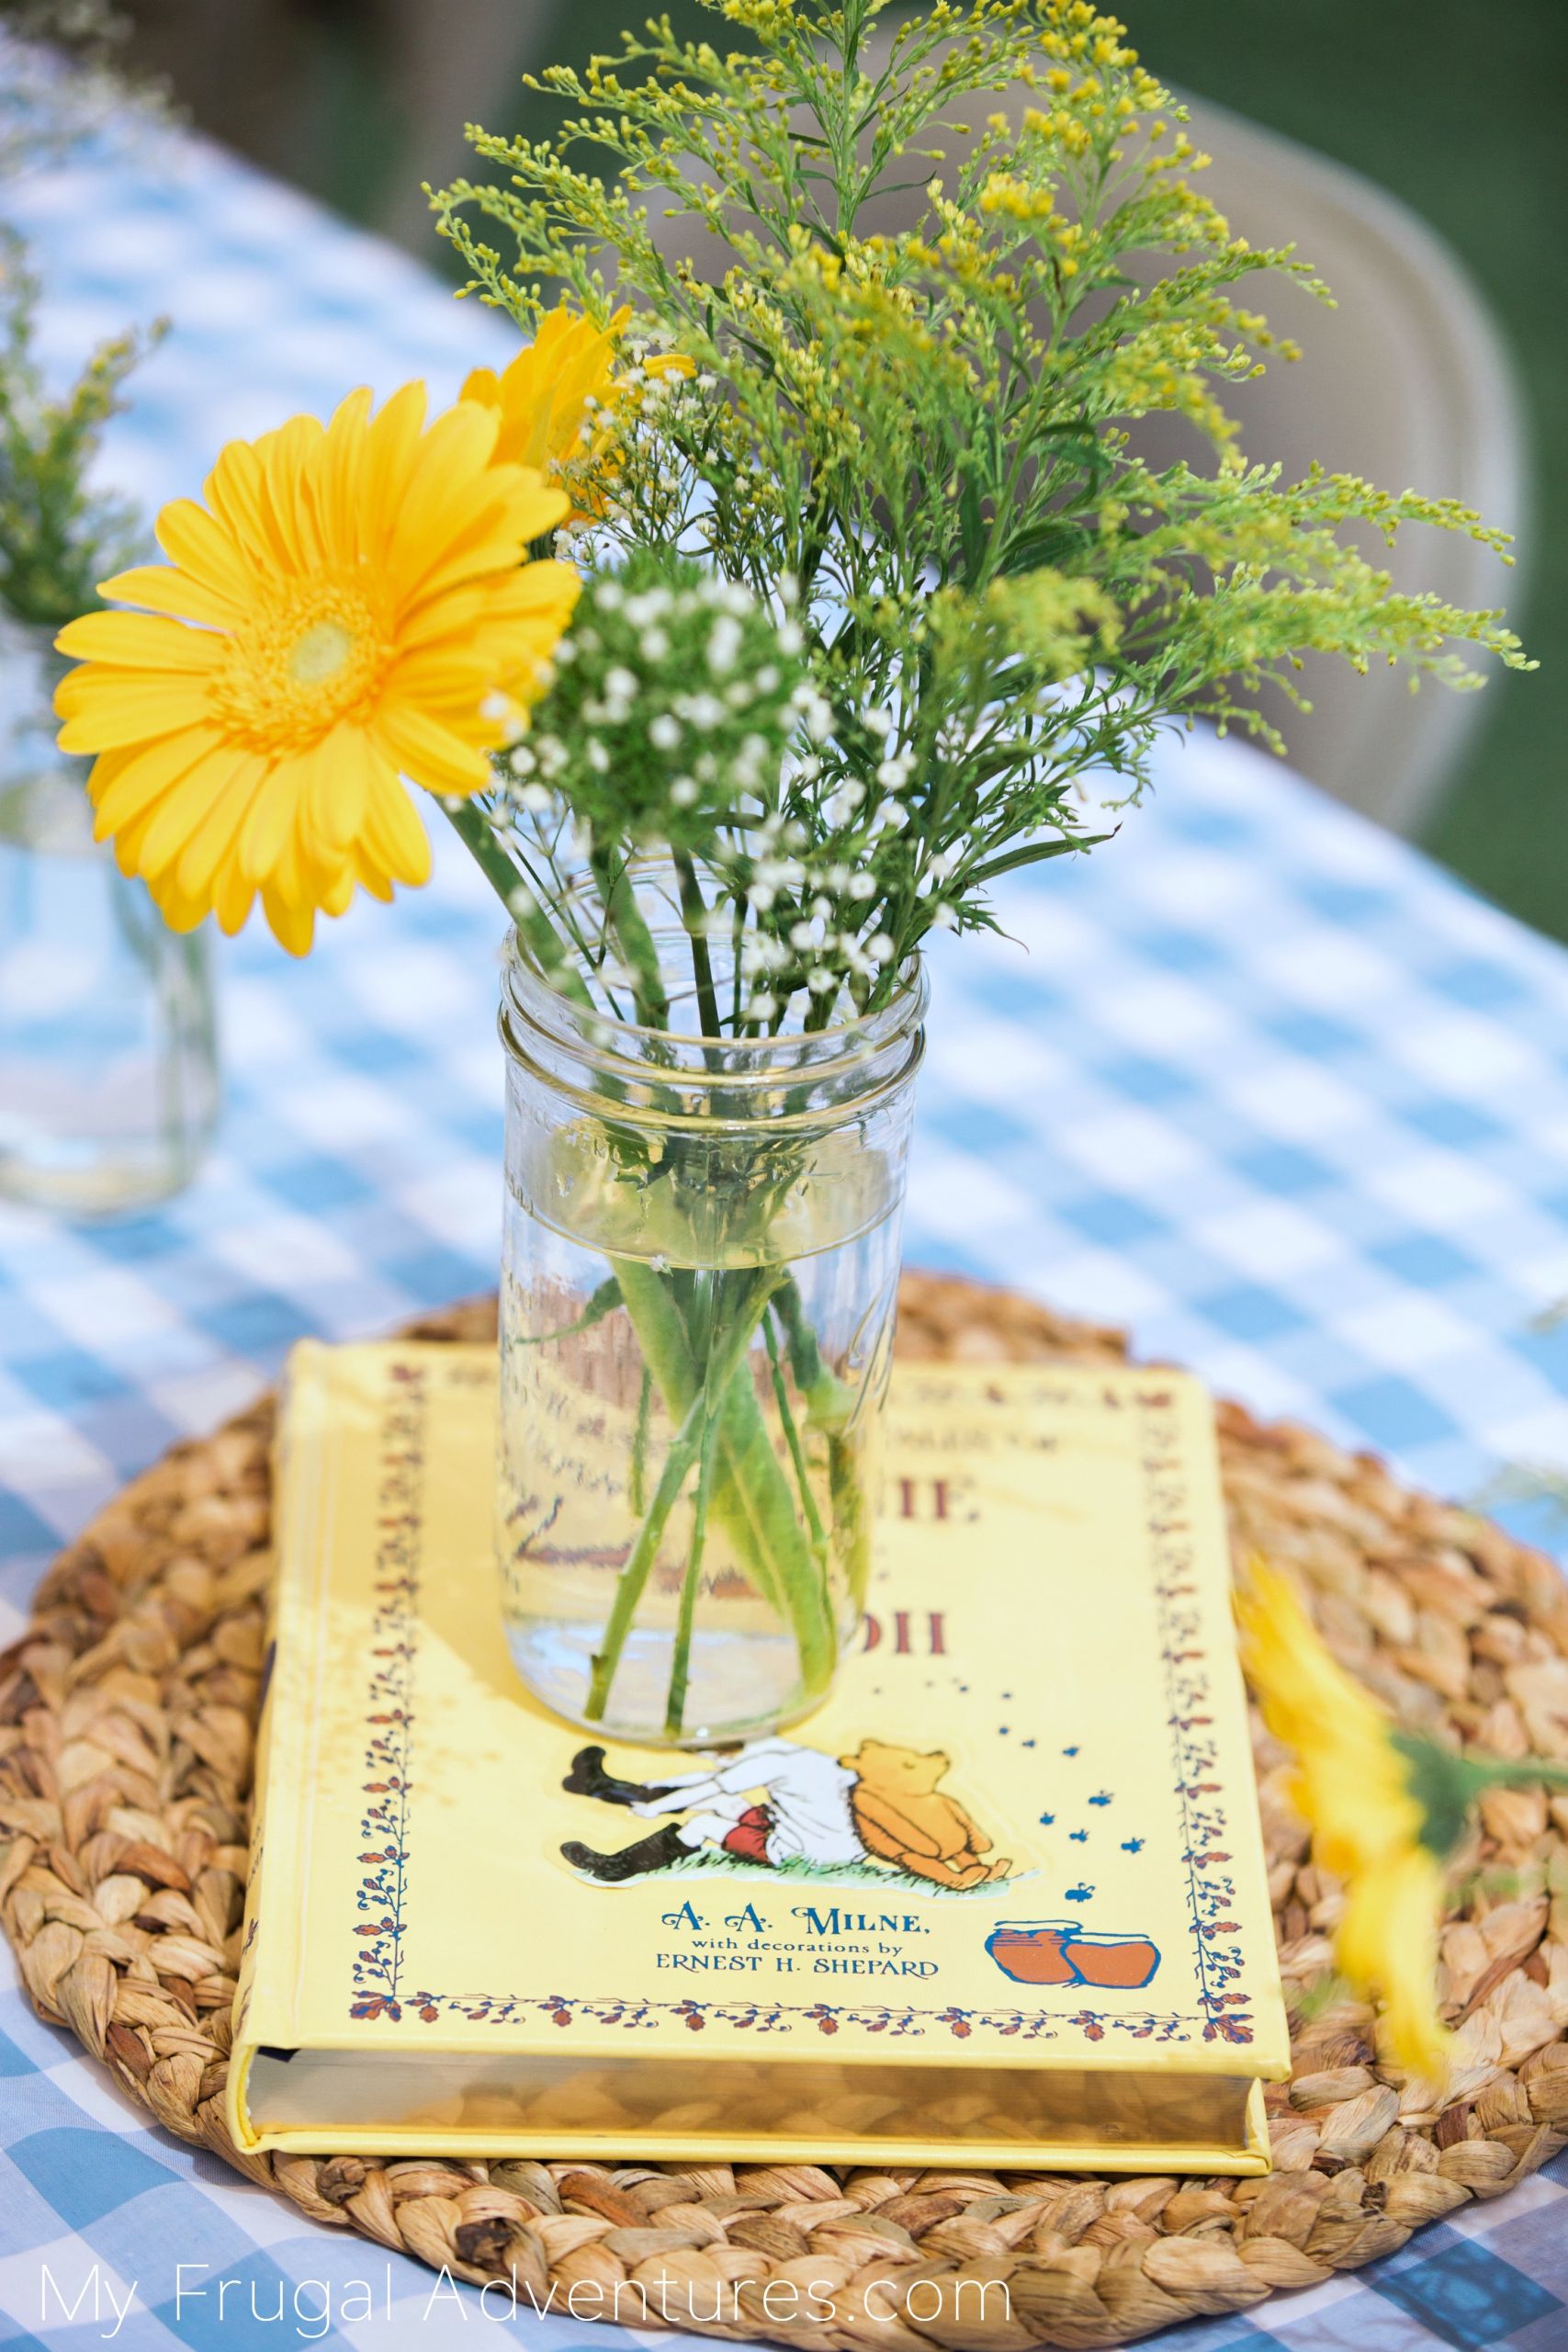 Winnie The Pooh Birthday Party Decorations
 Winnie the Pooh Party Ideas My Frugal Adventures